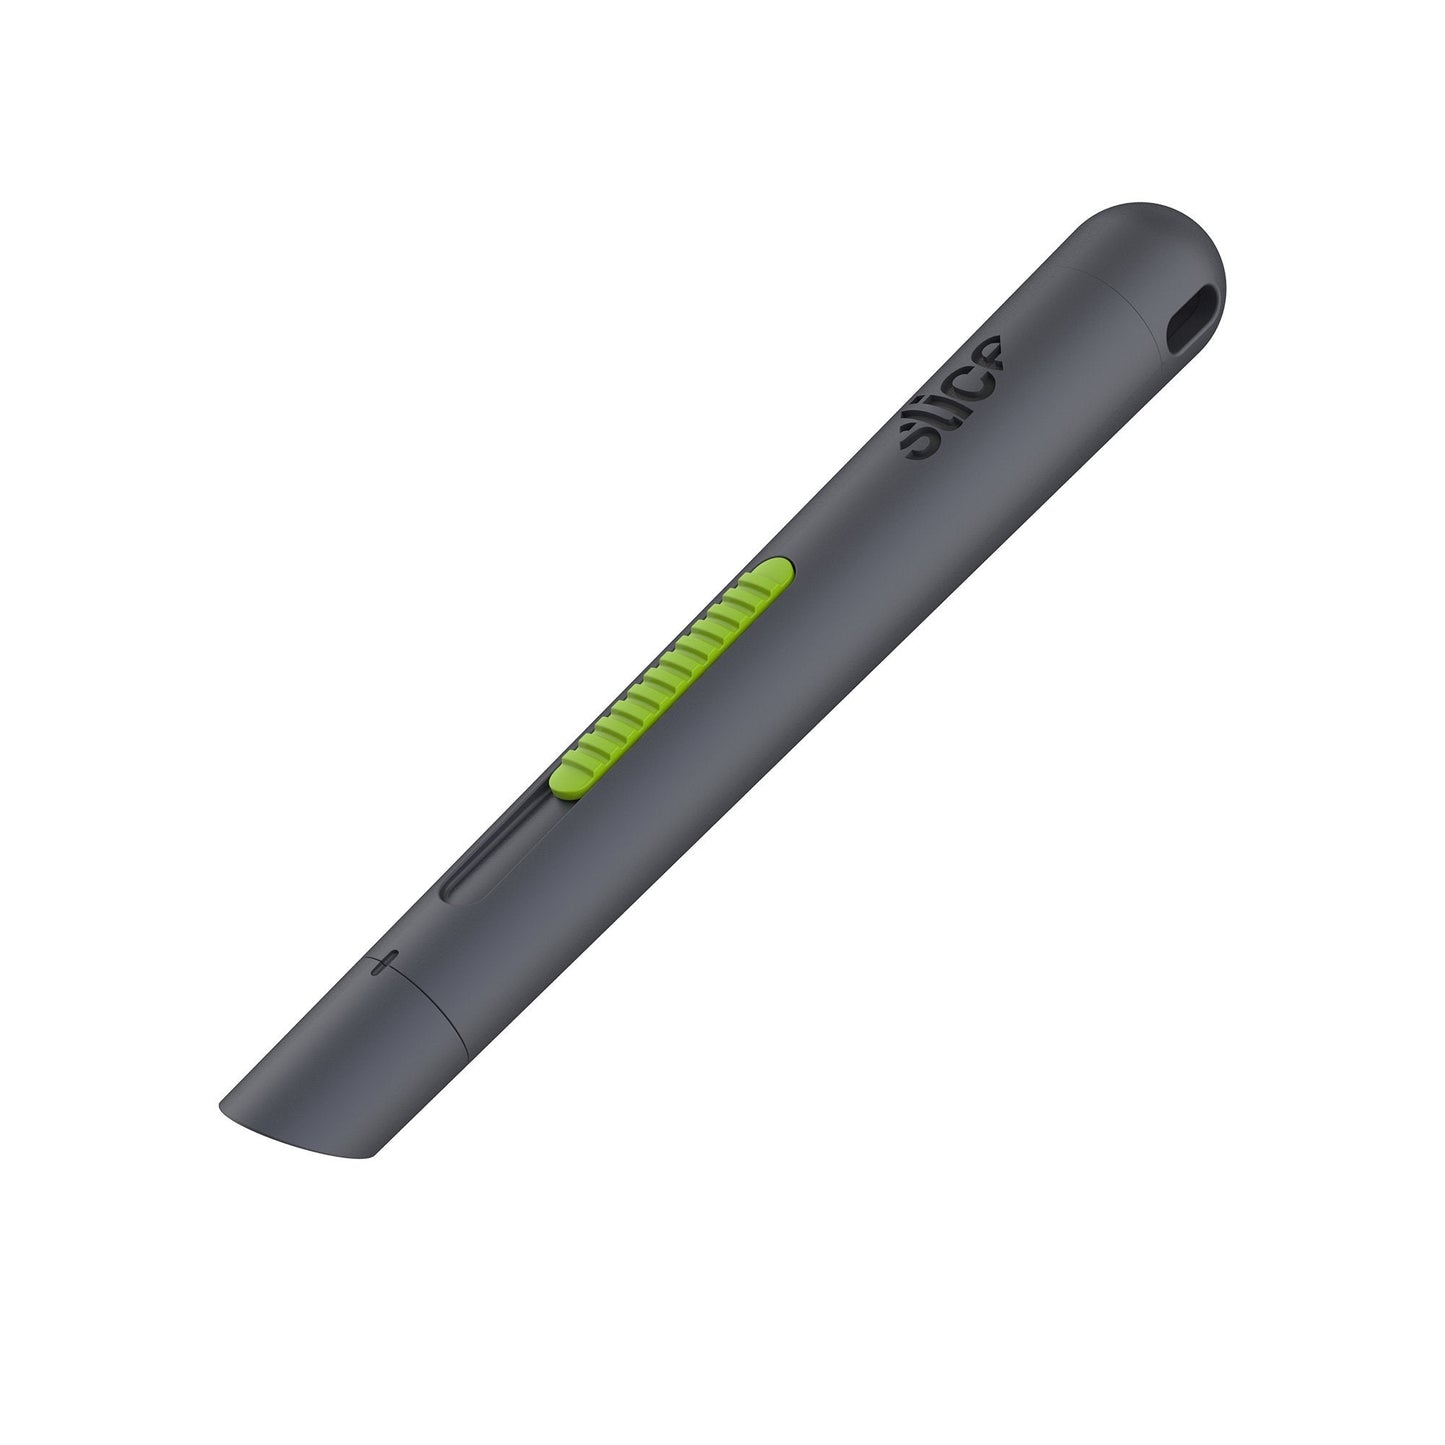 The Slice 10512 Auto-Retractable Pen Cutter with ceramic safety blade